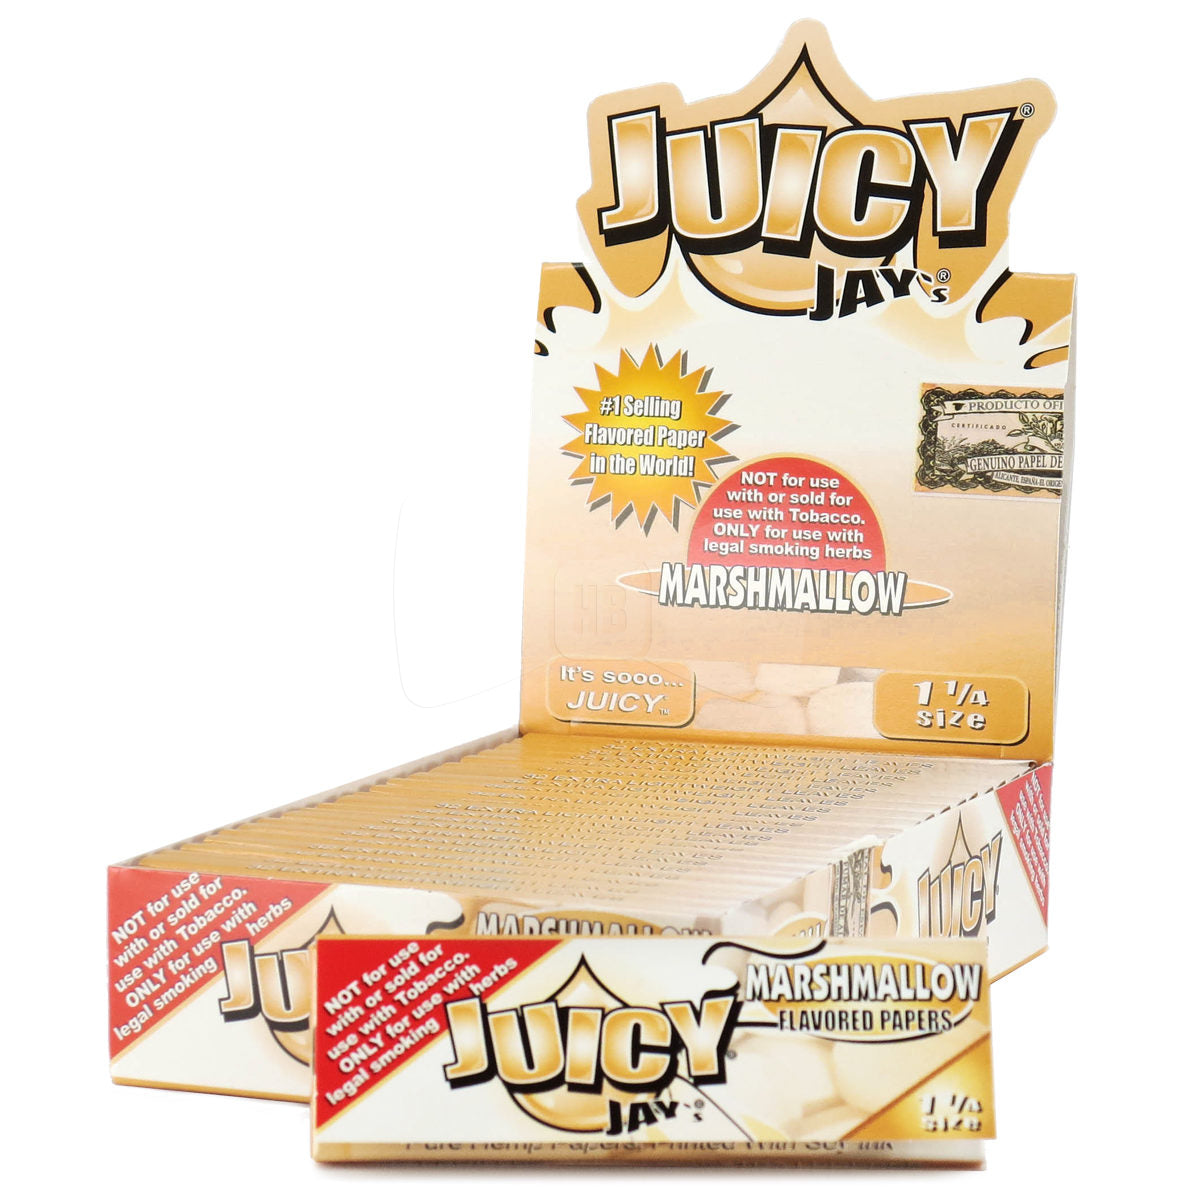 Juicy Jays 1 1/4" Size Flavored Rolling Paper